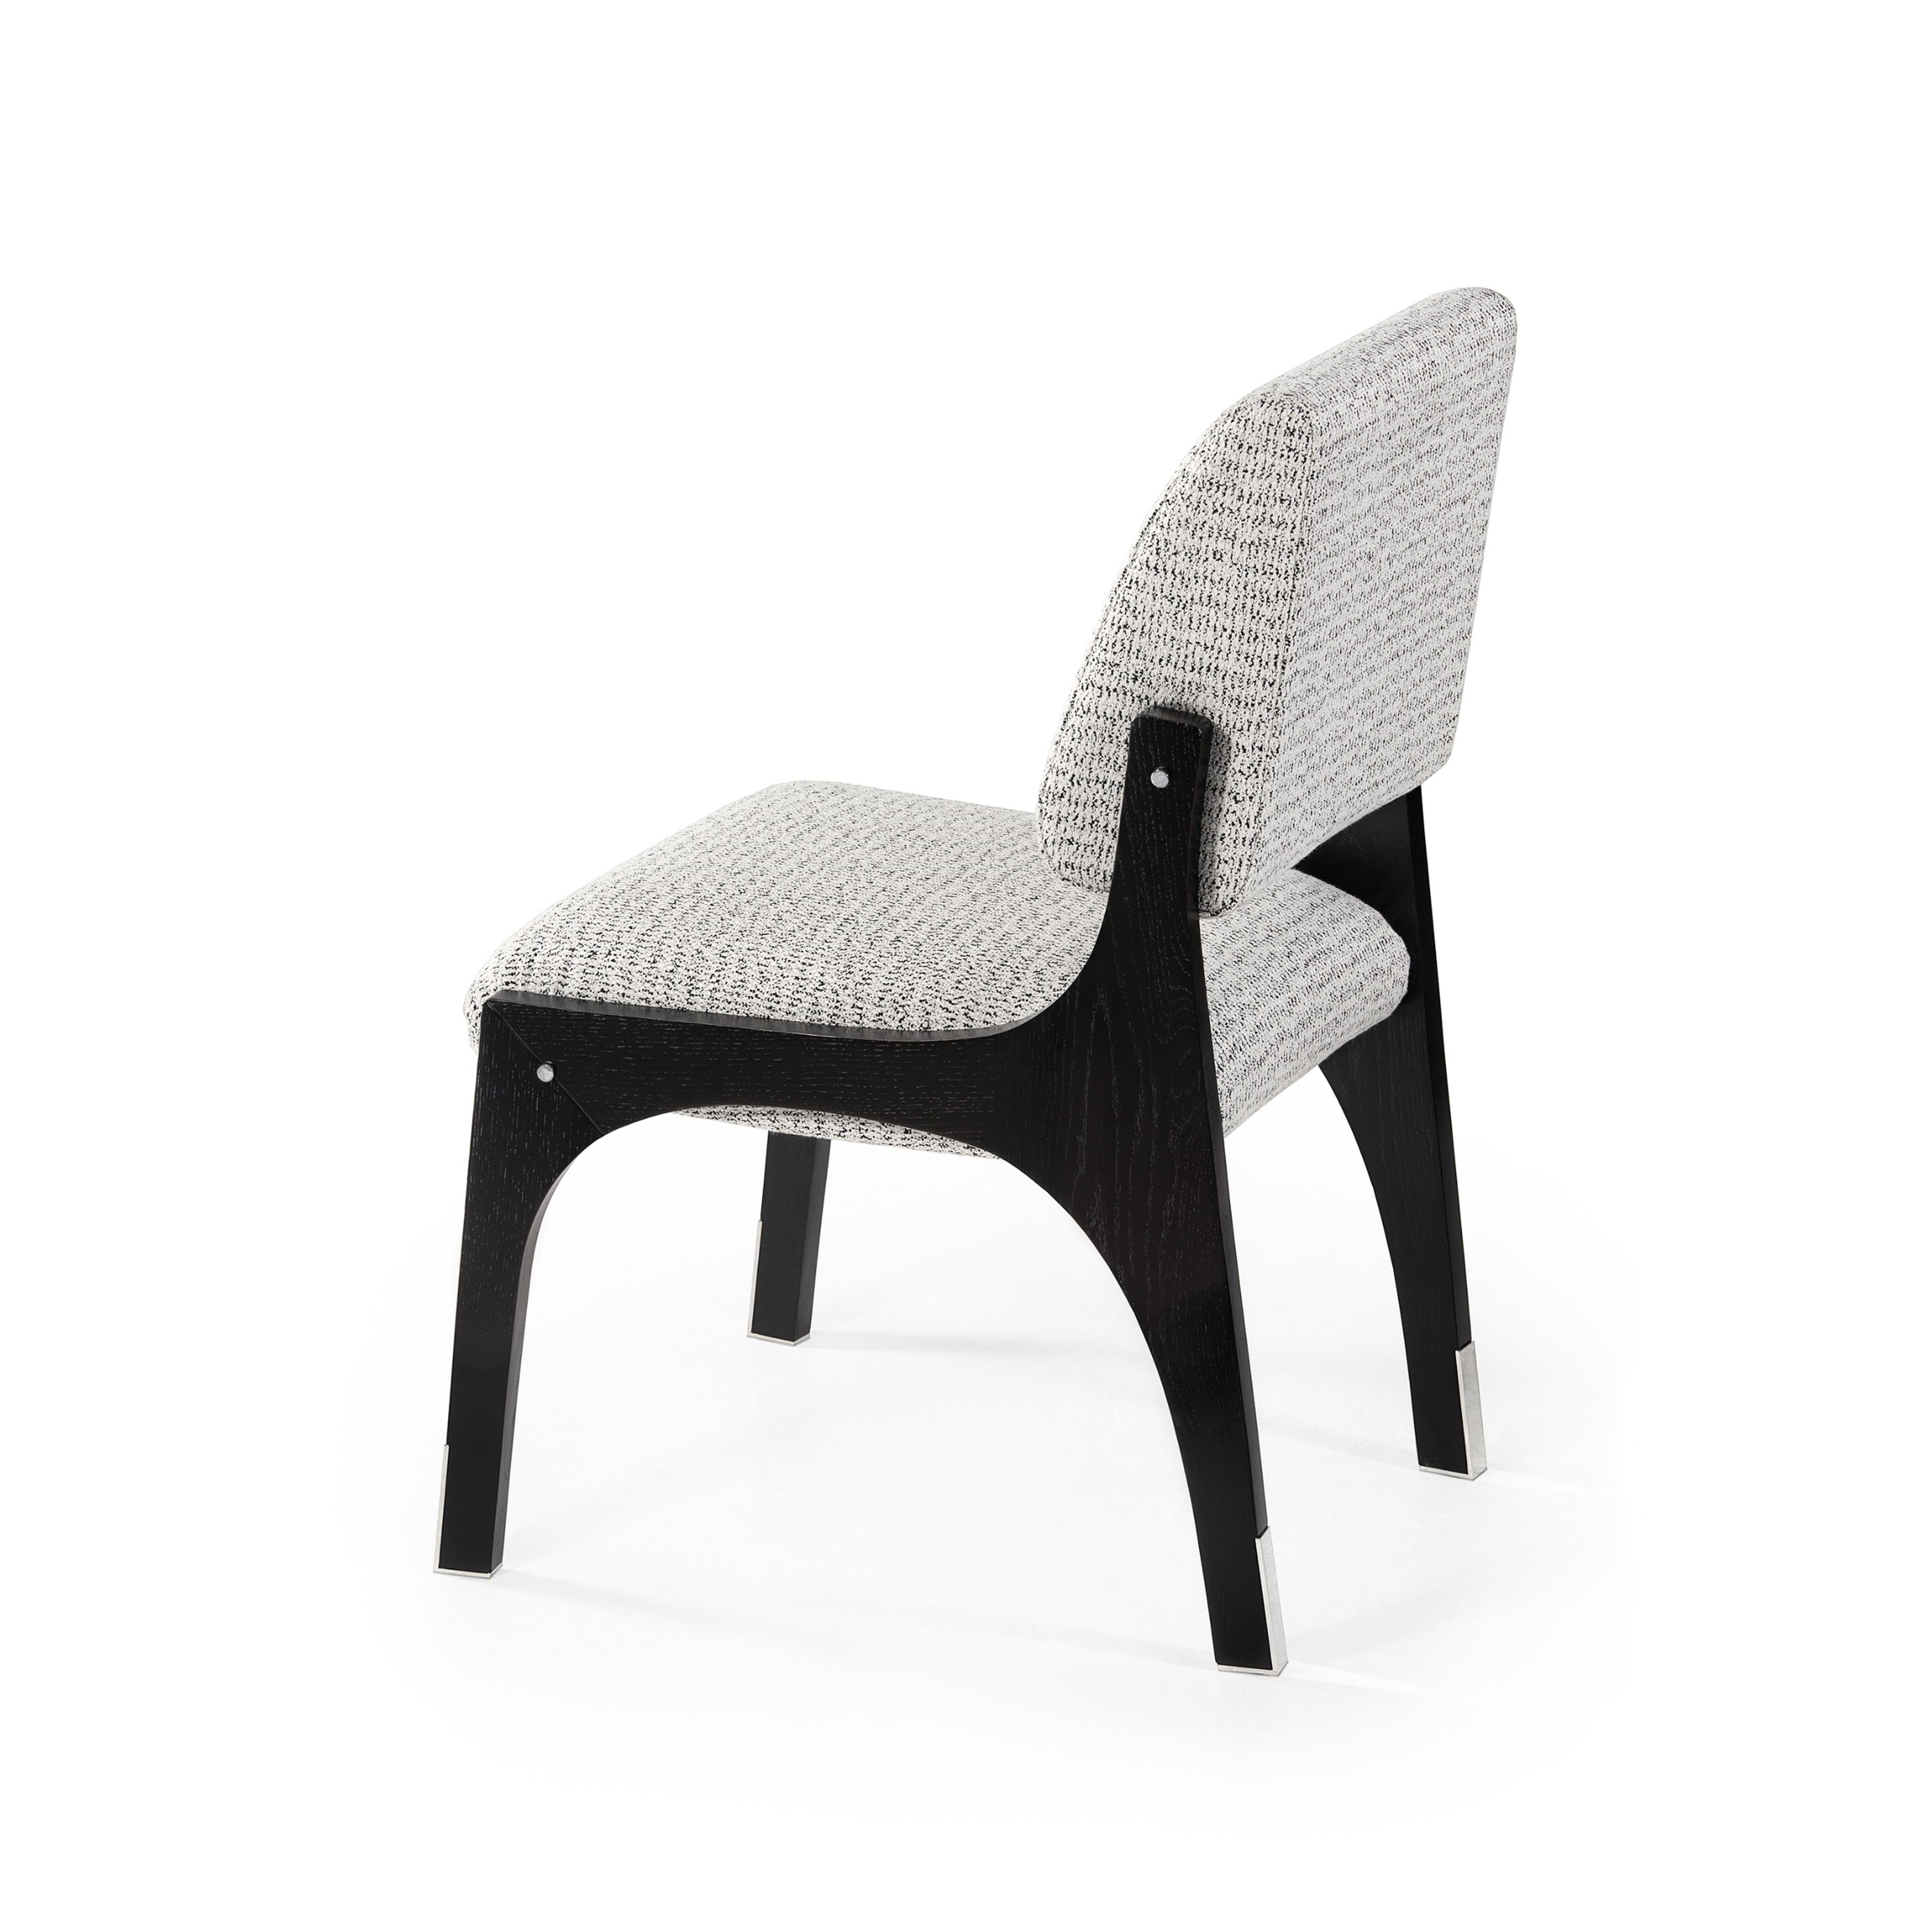 Portuguese Arches II Dining Chair, Fusion & Steel, Insidherland by Joana Santos Barbosa For Sale